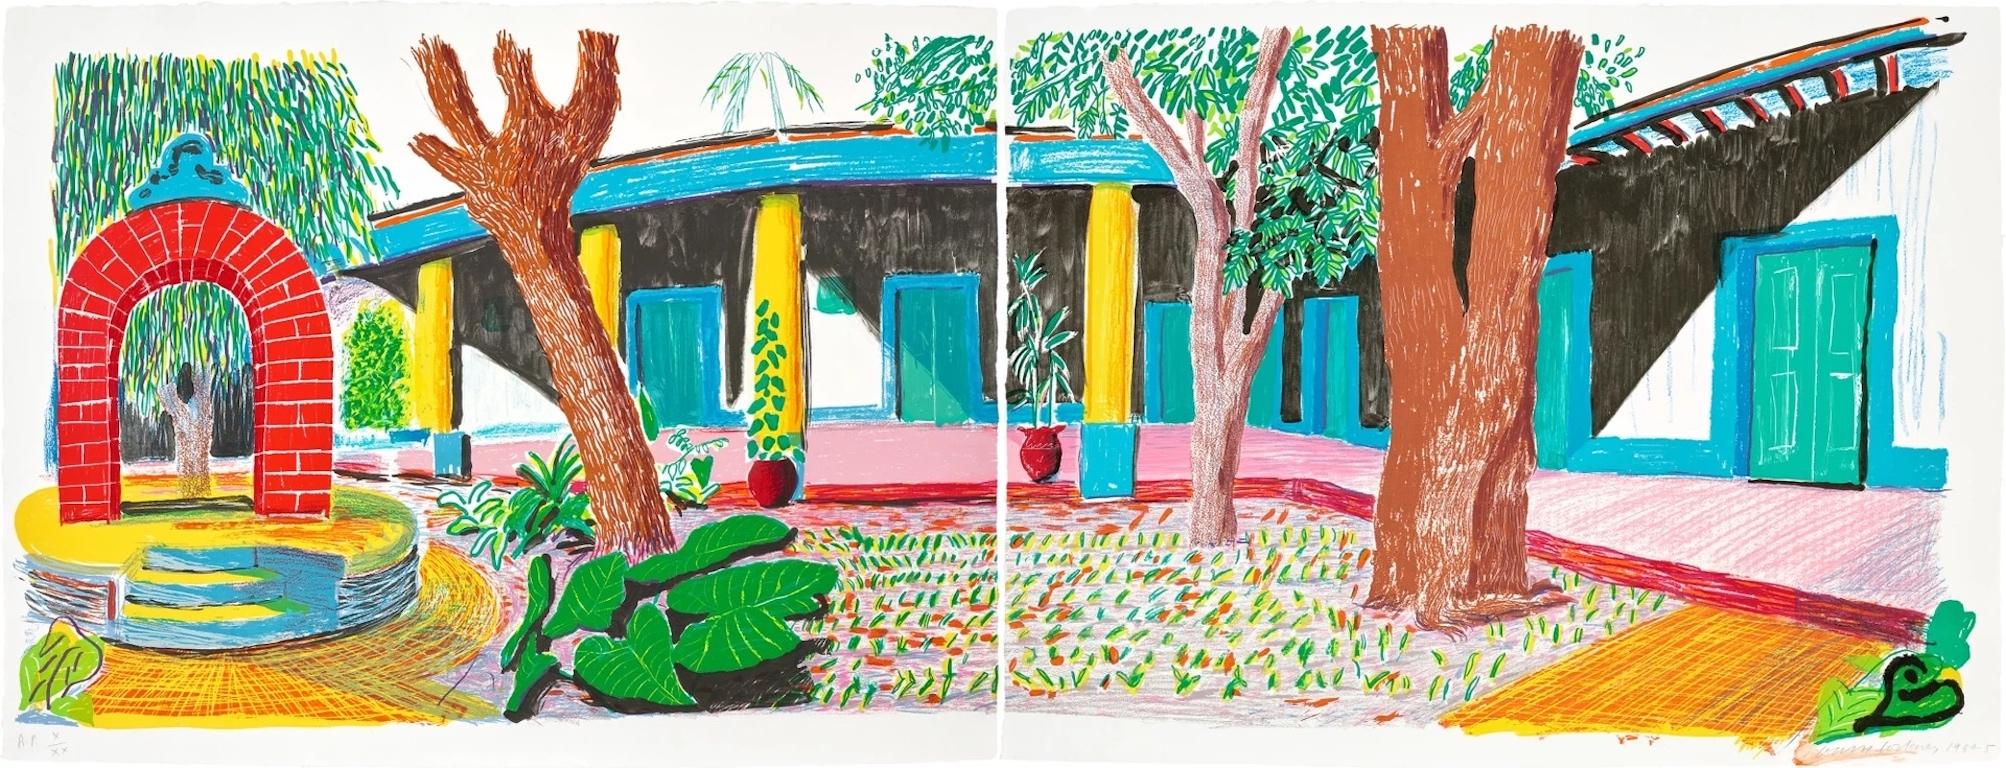 David Hockney Landscape Print - Hotel Acatlán: Second Day, from Moving Focus (T.G. 283, M.C.A.T. 270)